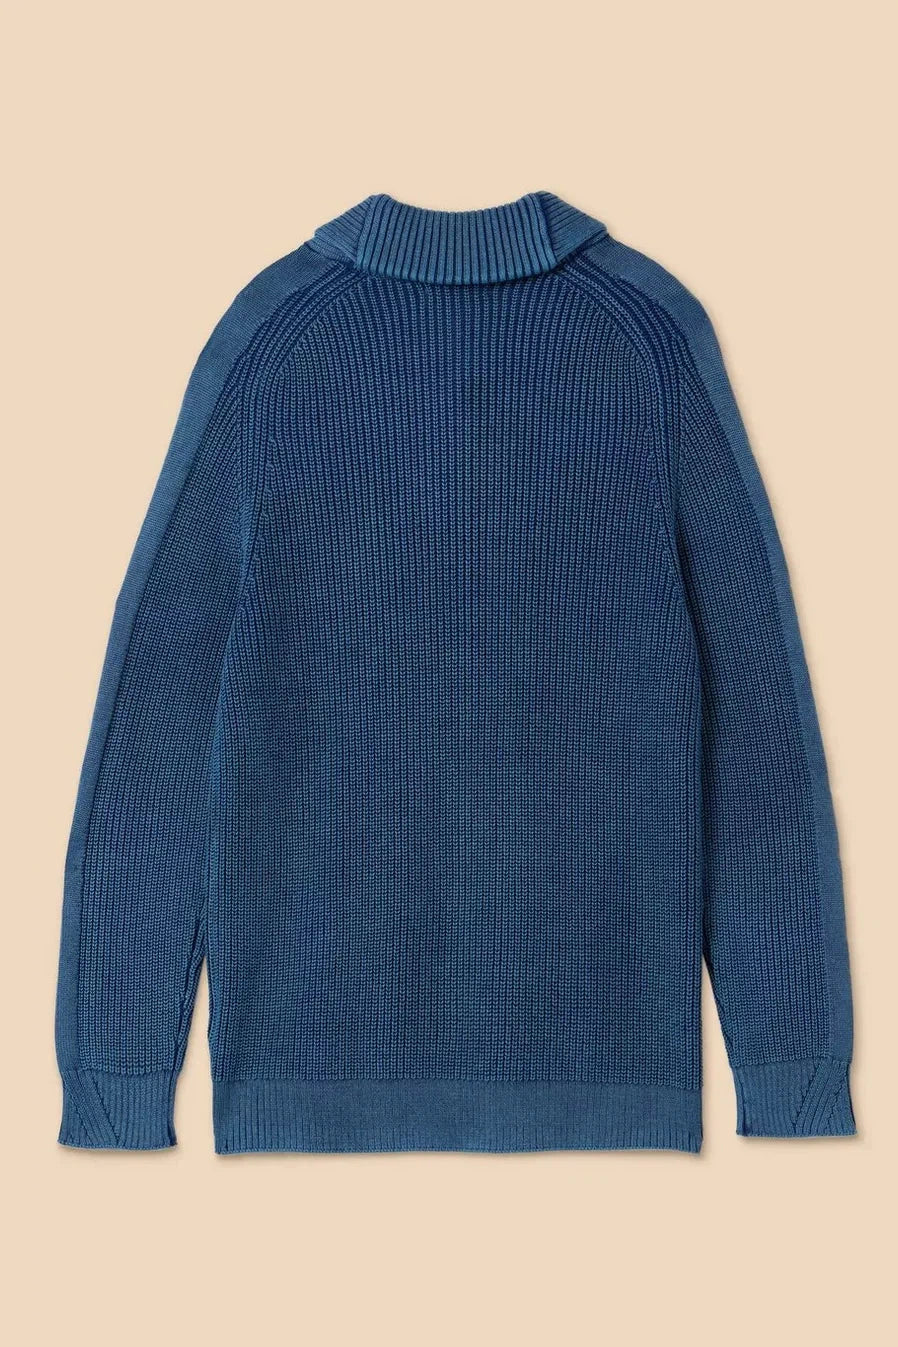 White Stuff Ribbed Shawl Neck Jumper-Mens-Ohh! By Gum - Shop Sustainable